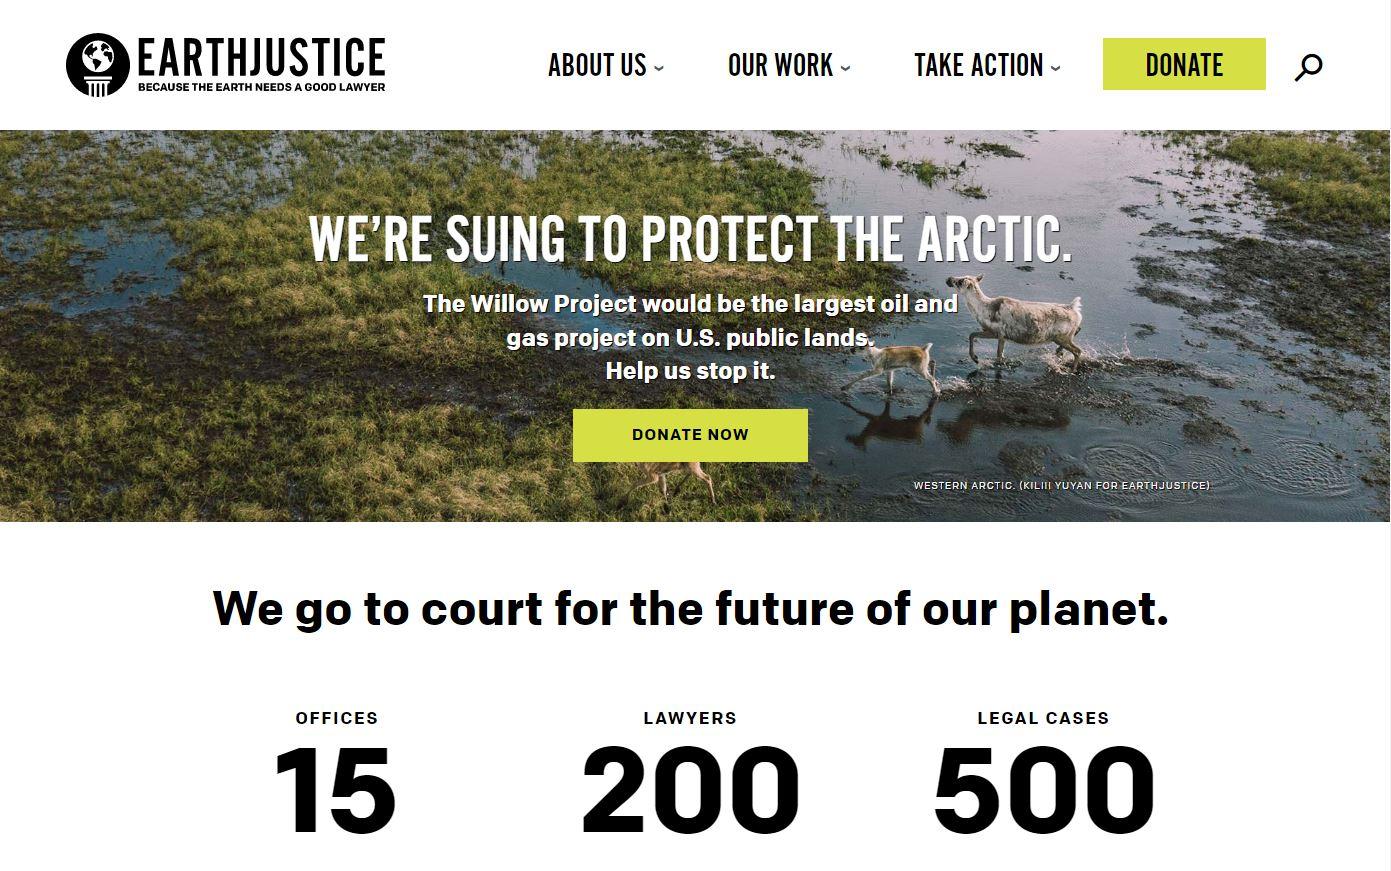 charity website design examples, Earthjustice